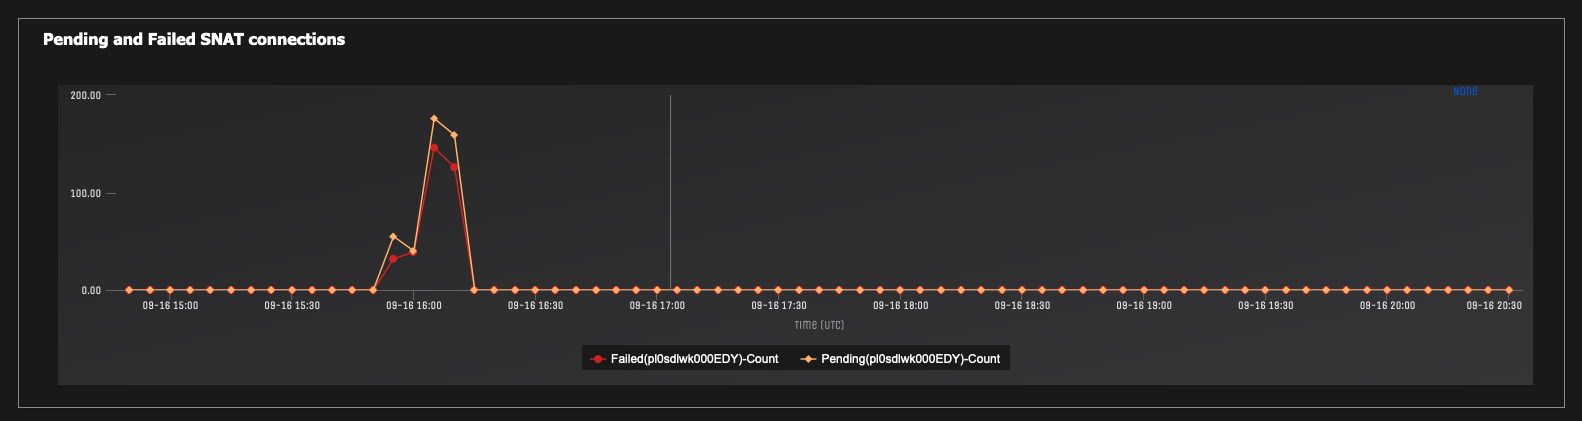 Shows a spike in pending connections due to running out of ports